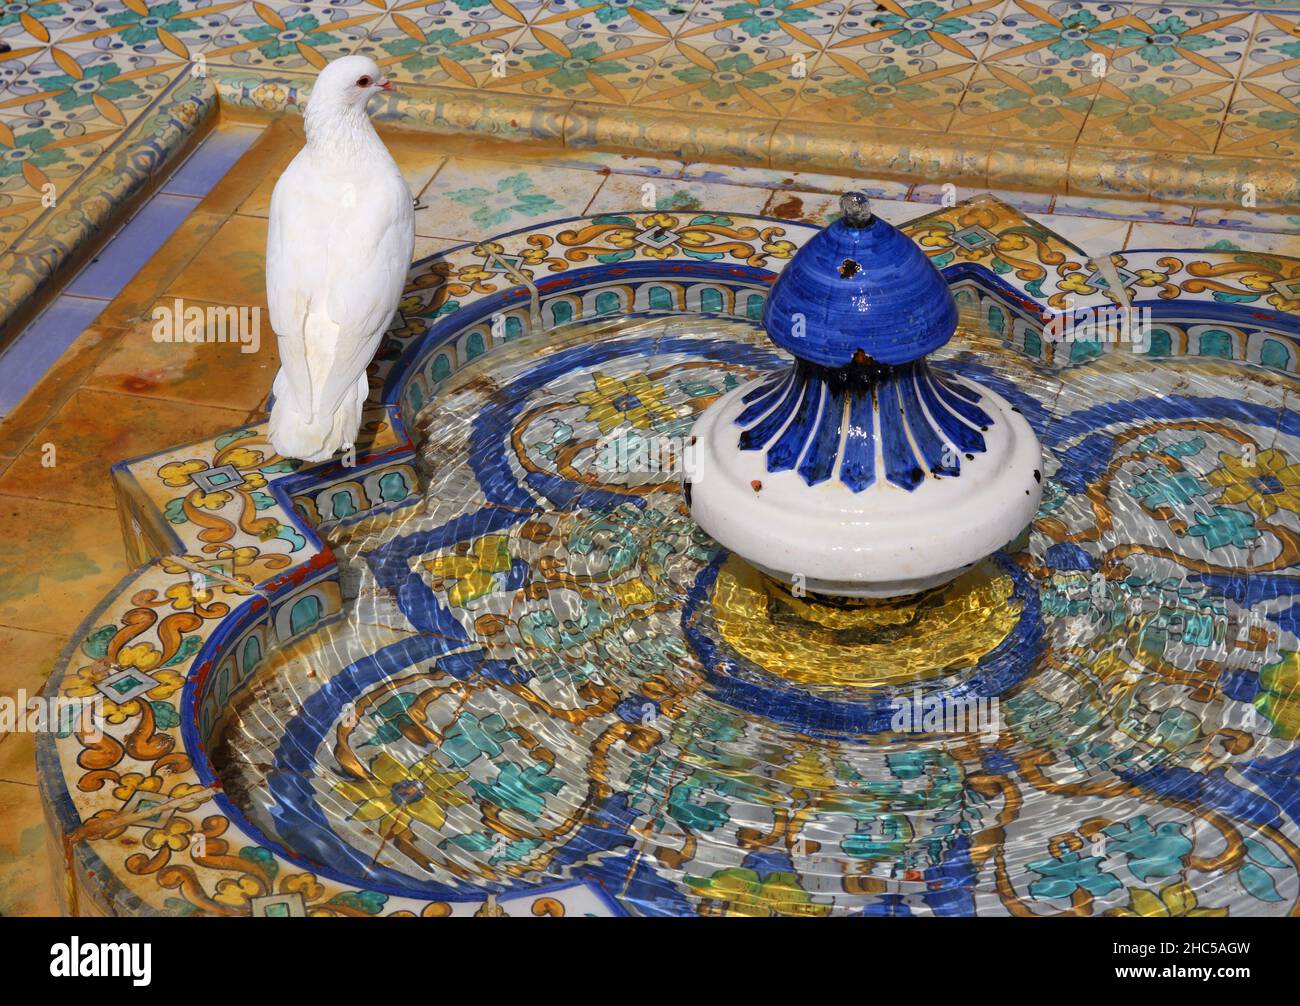 Intricate, colorful, ceramic fountain and white dove by the Arabesque Mudejar Pavilion, Maria Luisa Park, Seville, Andalusia, Spain. Stock Photo